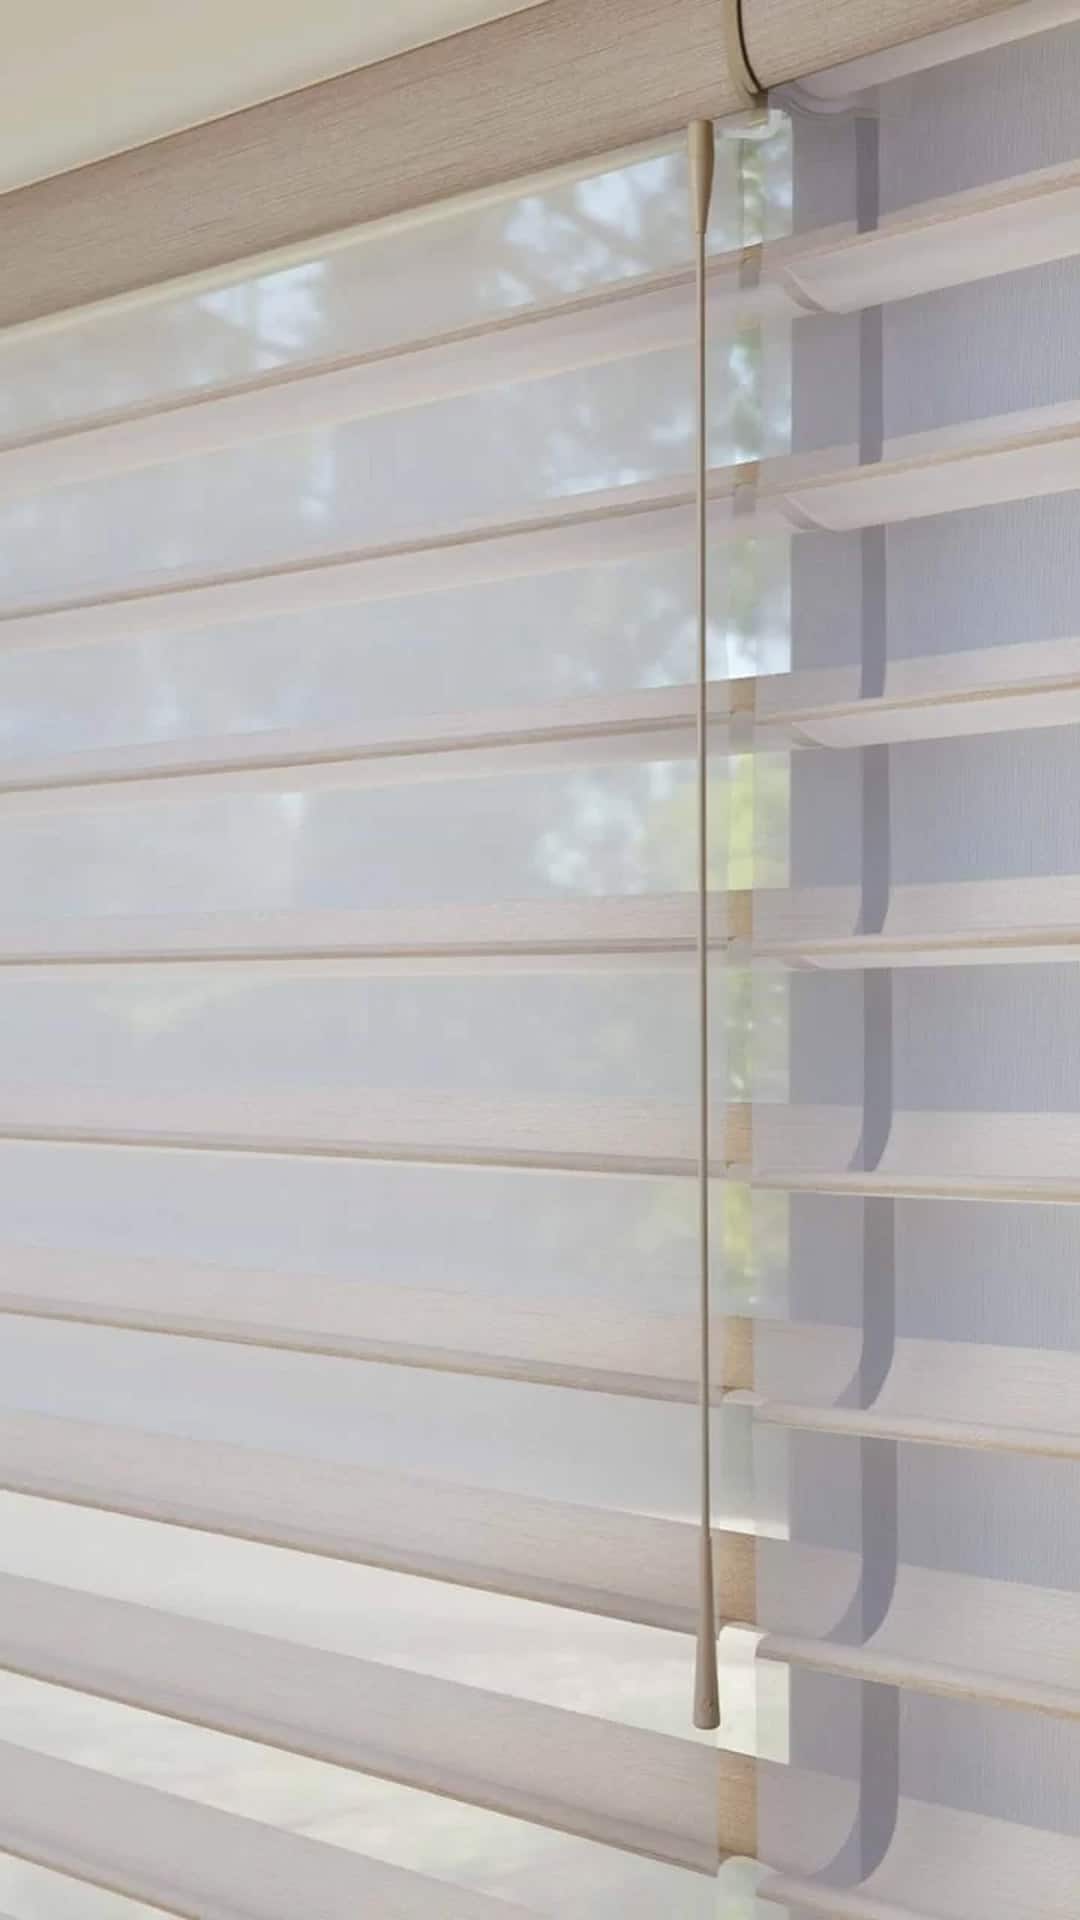 Hunter Douglas Silhouette Shades with Soft Touch Motorization Operating System